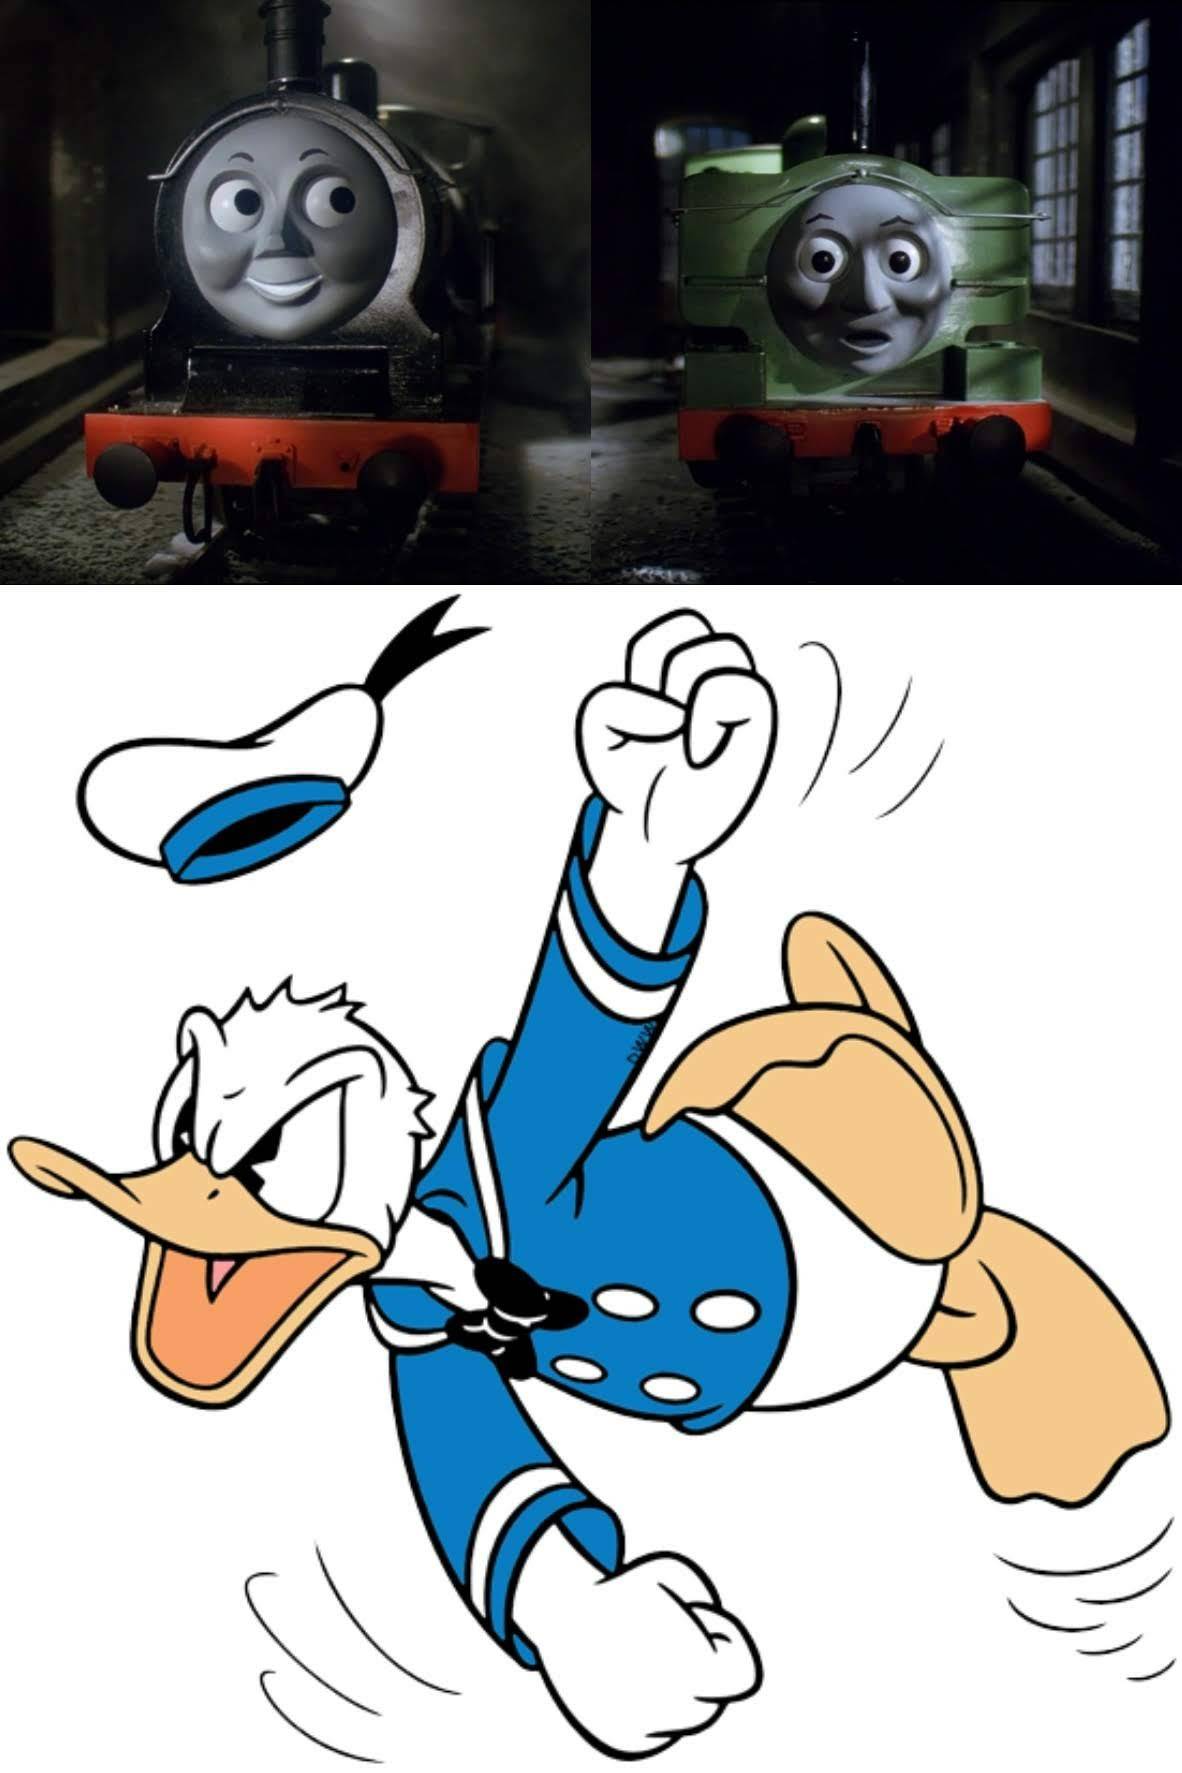 Donald Duck's Reaction to the Episode by sirjosh9 on DeviantArt